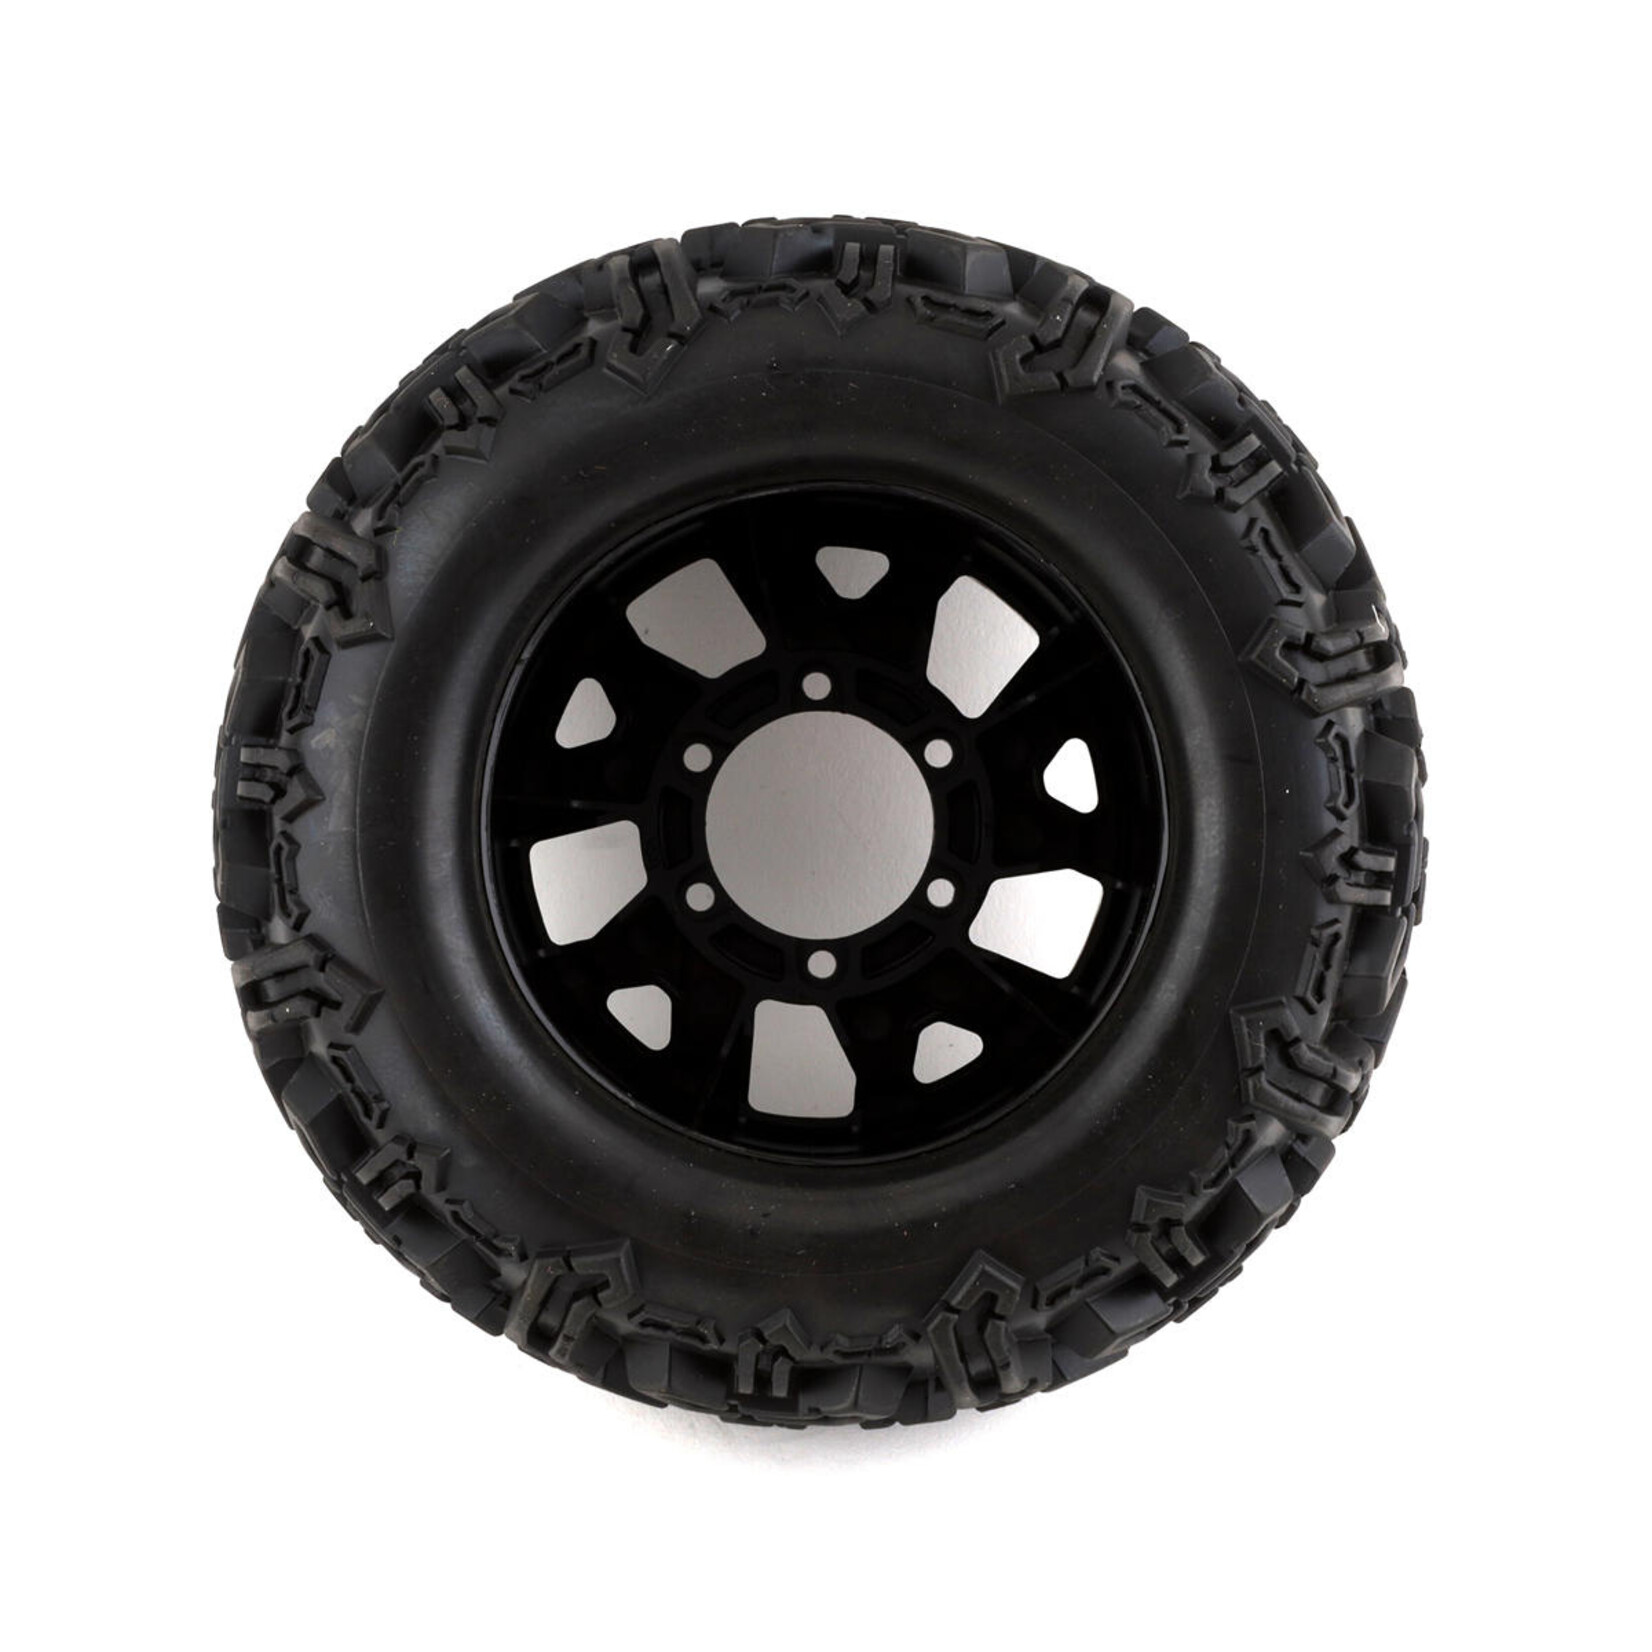 Duratrax DuraTrax Warthog 2.8" Pre-Mounted Tires (Black) (2) w/Ripper Wheels & Removable 12mm Hex #DTX564310